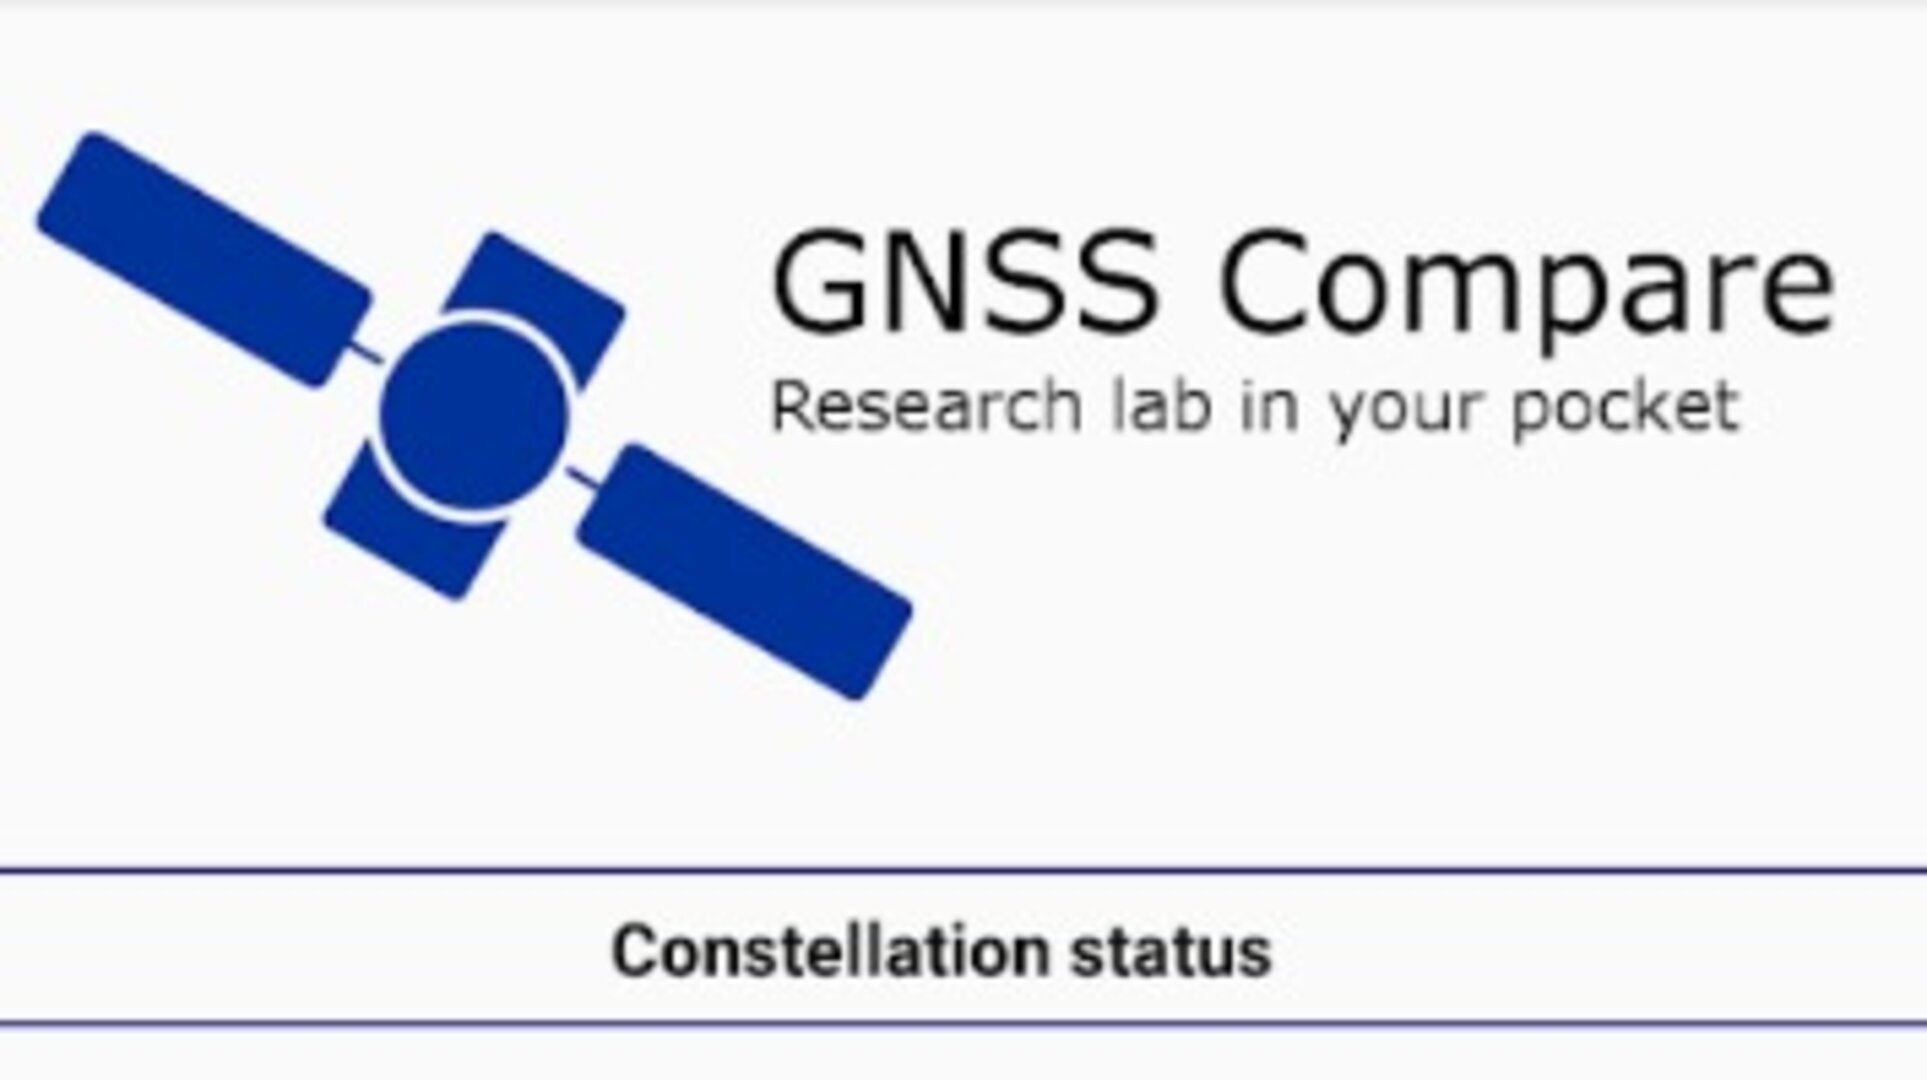 GNSS Compare app